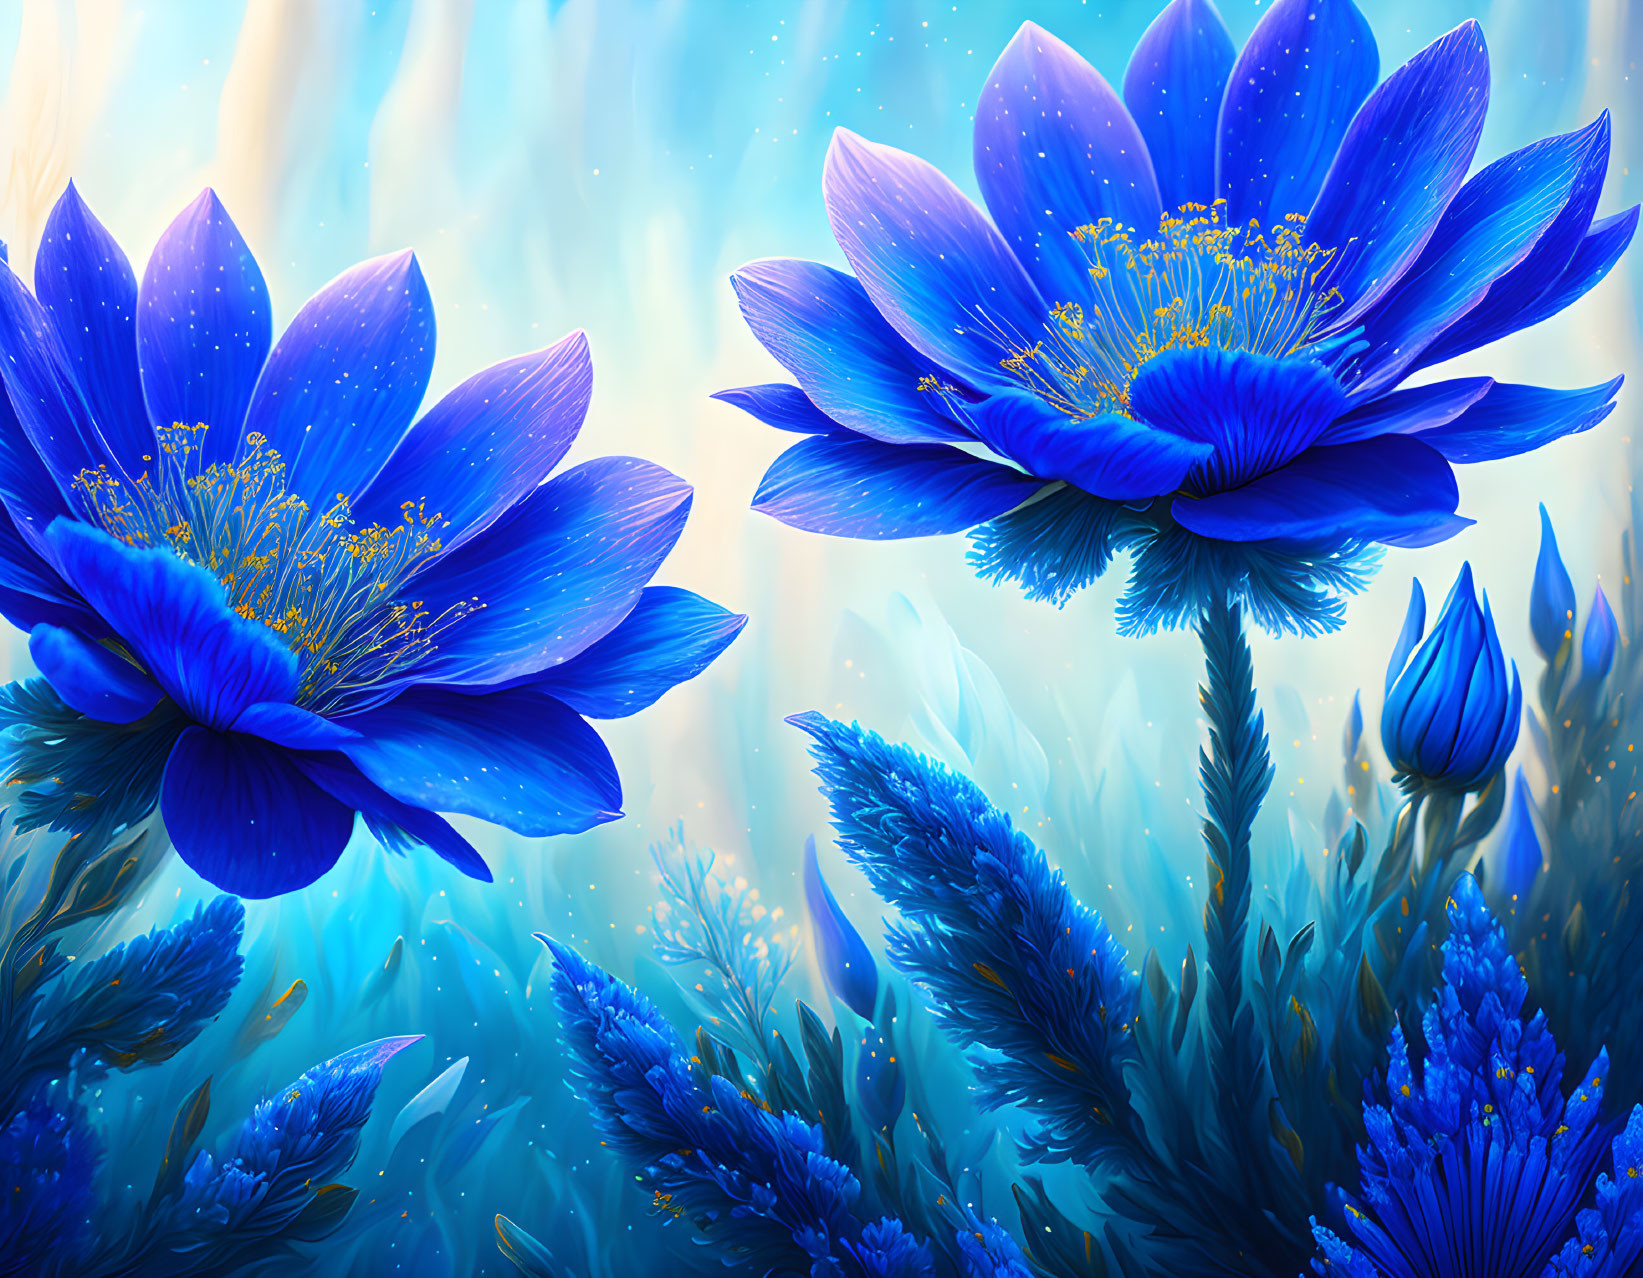 Vibrant Blue Flowers with Yellow Centers on Mystical Blue Background